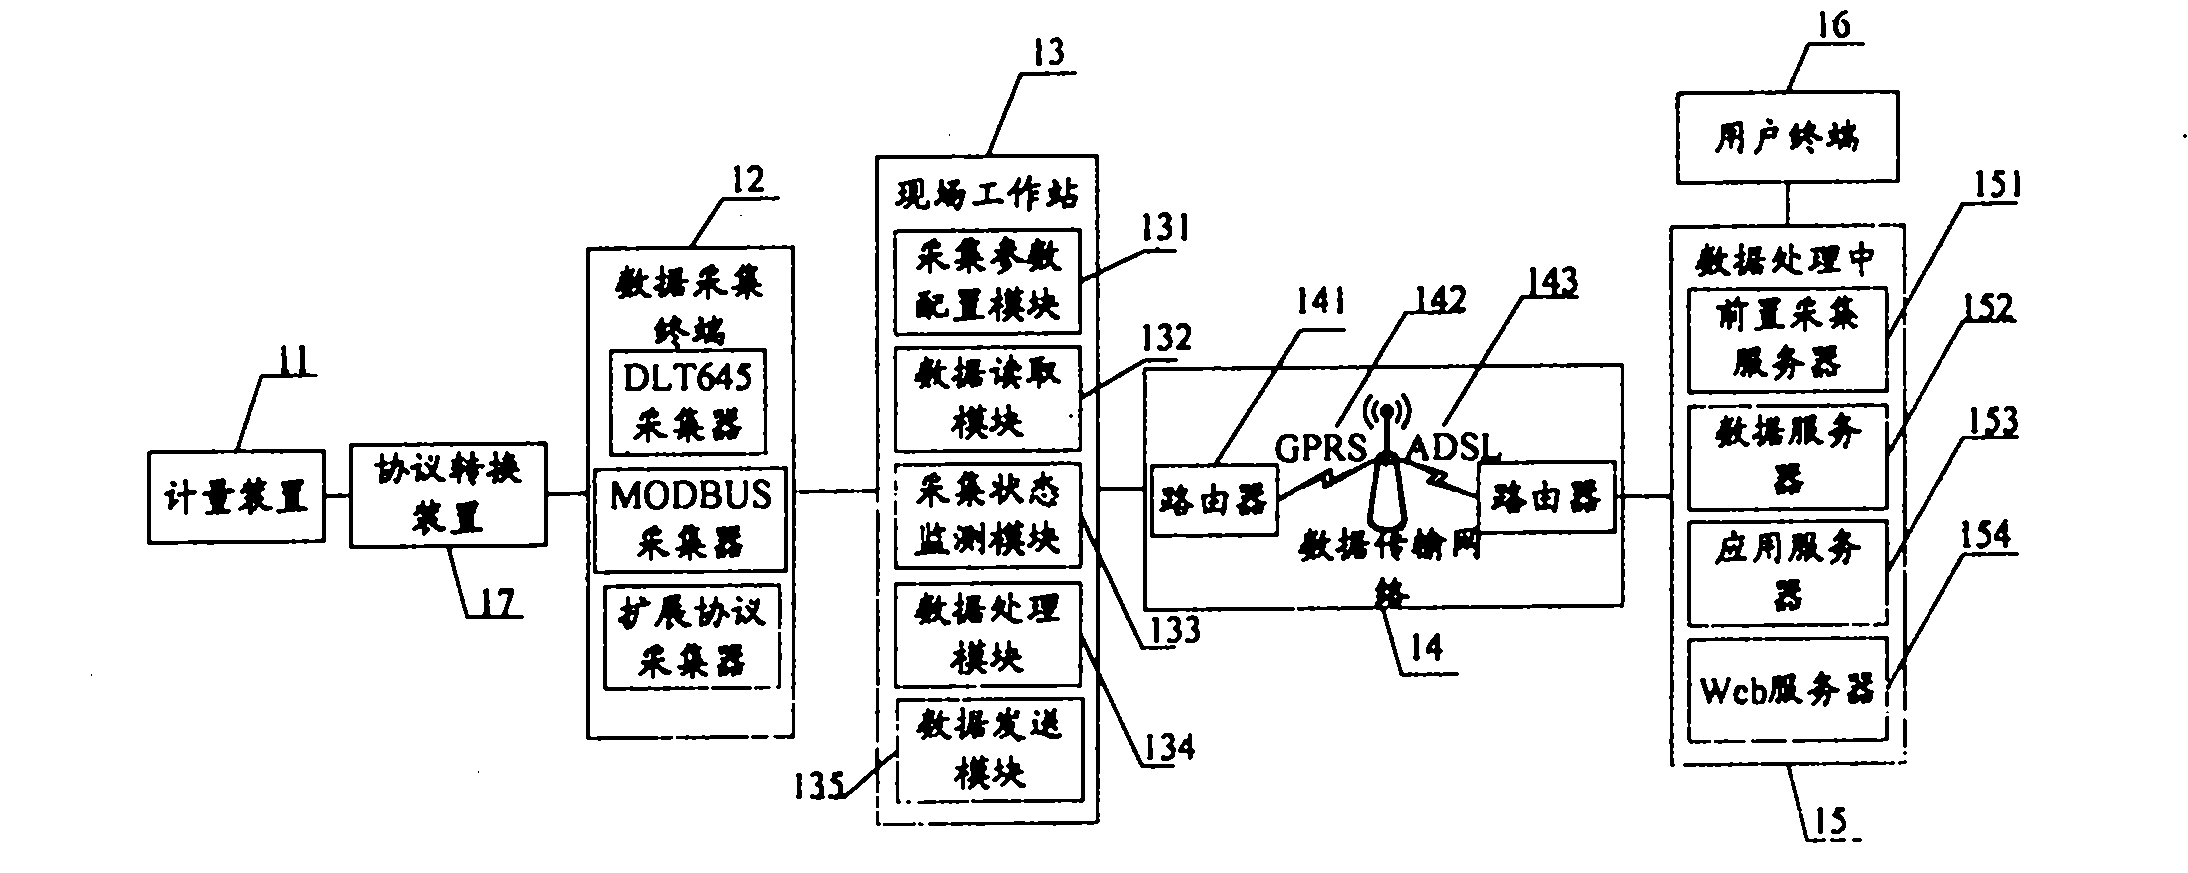 System for remotely monitoring energy consumption of central air-conditioning